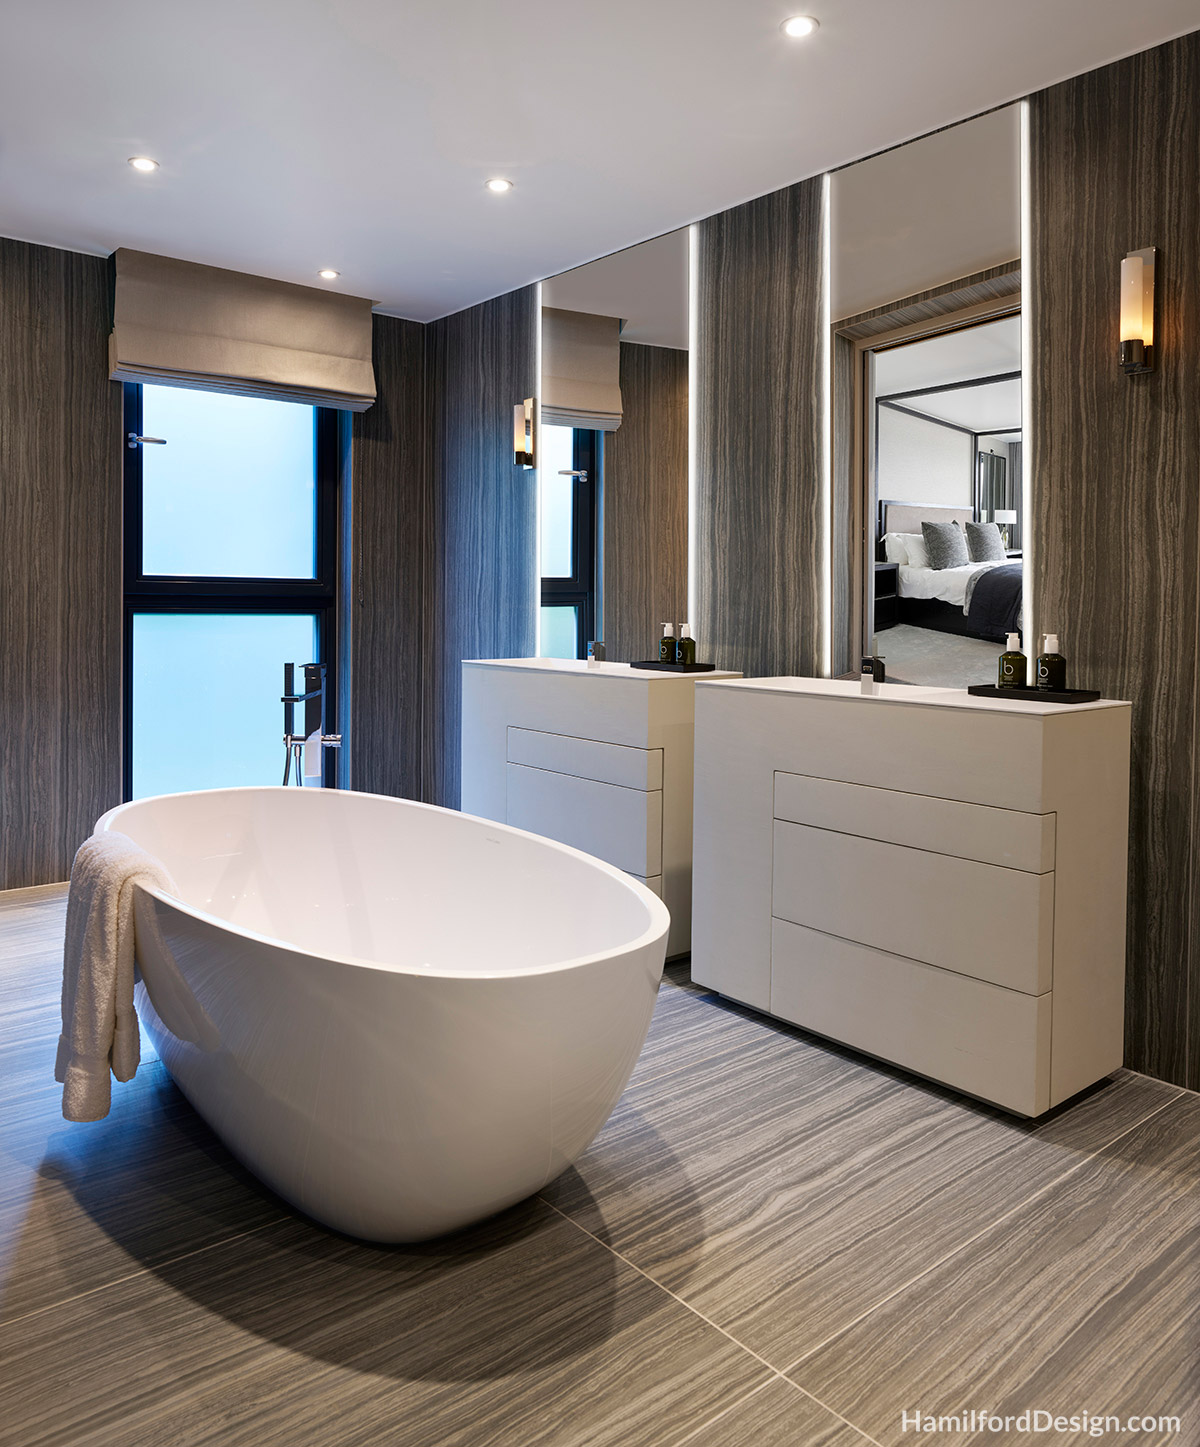 Bathroom - Master Sn-suite with a Free Standing Bath